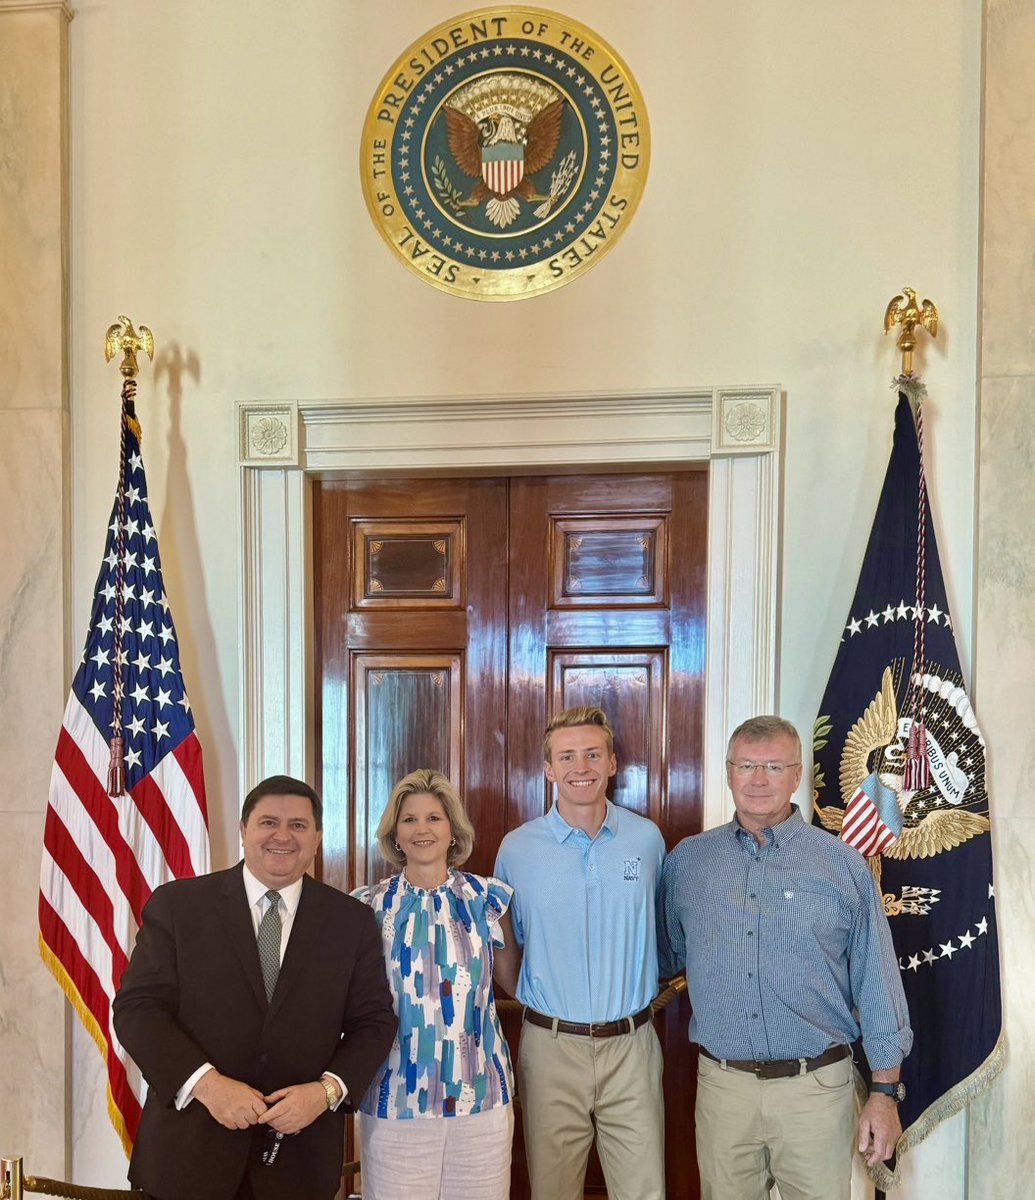 An honor to visit the White House today with my @SigmaChi_UA fraternity brother, Steve Moultrie, with Julie and their son Sam who graduates from @NavalAcademy this week! Bravo Zulu for a job well done, Sam! ⚓️ 🇺🇸